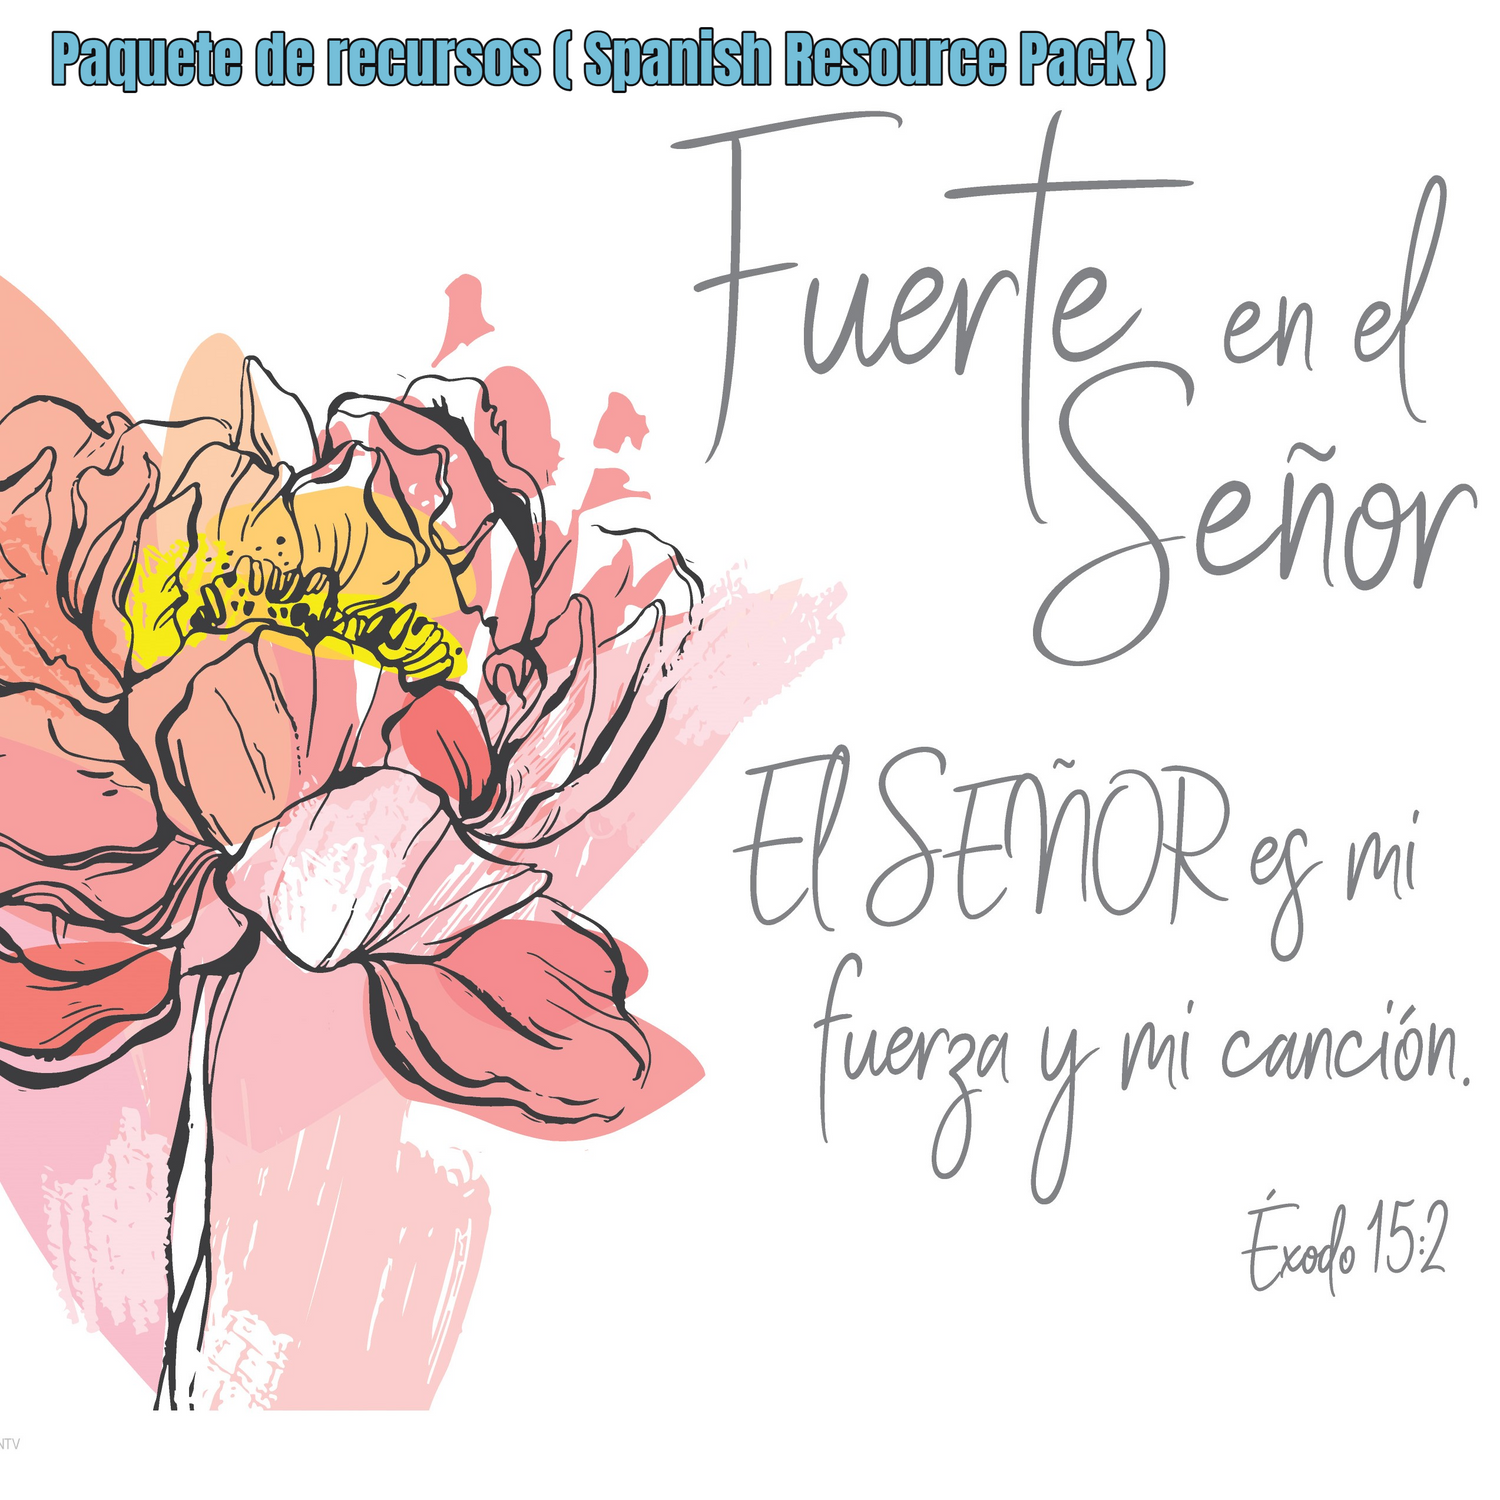 Spanish Christian Women's Downloadable Resource Pack